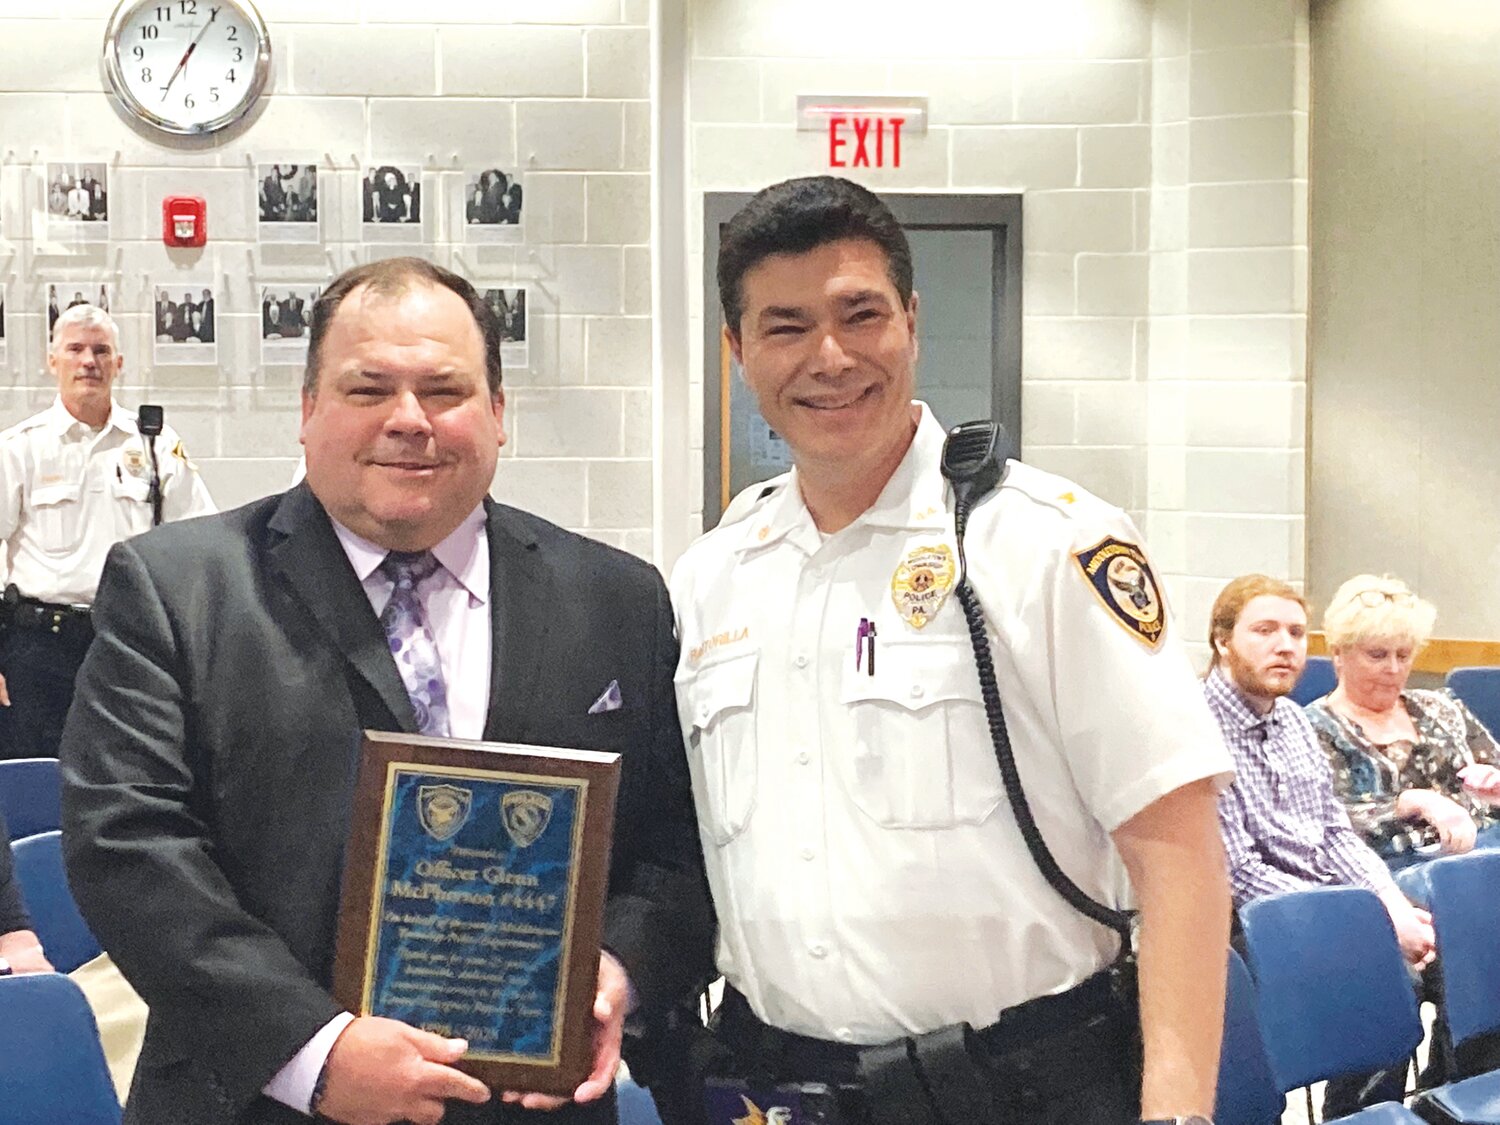 Middletown Township Police Officer Glenn McPherson, left, and Chief Joseph Bartorilla after McPherson was honored on retiring from his special role on the South and Central Bucks County Special Emergency Response Team.